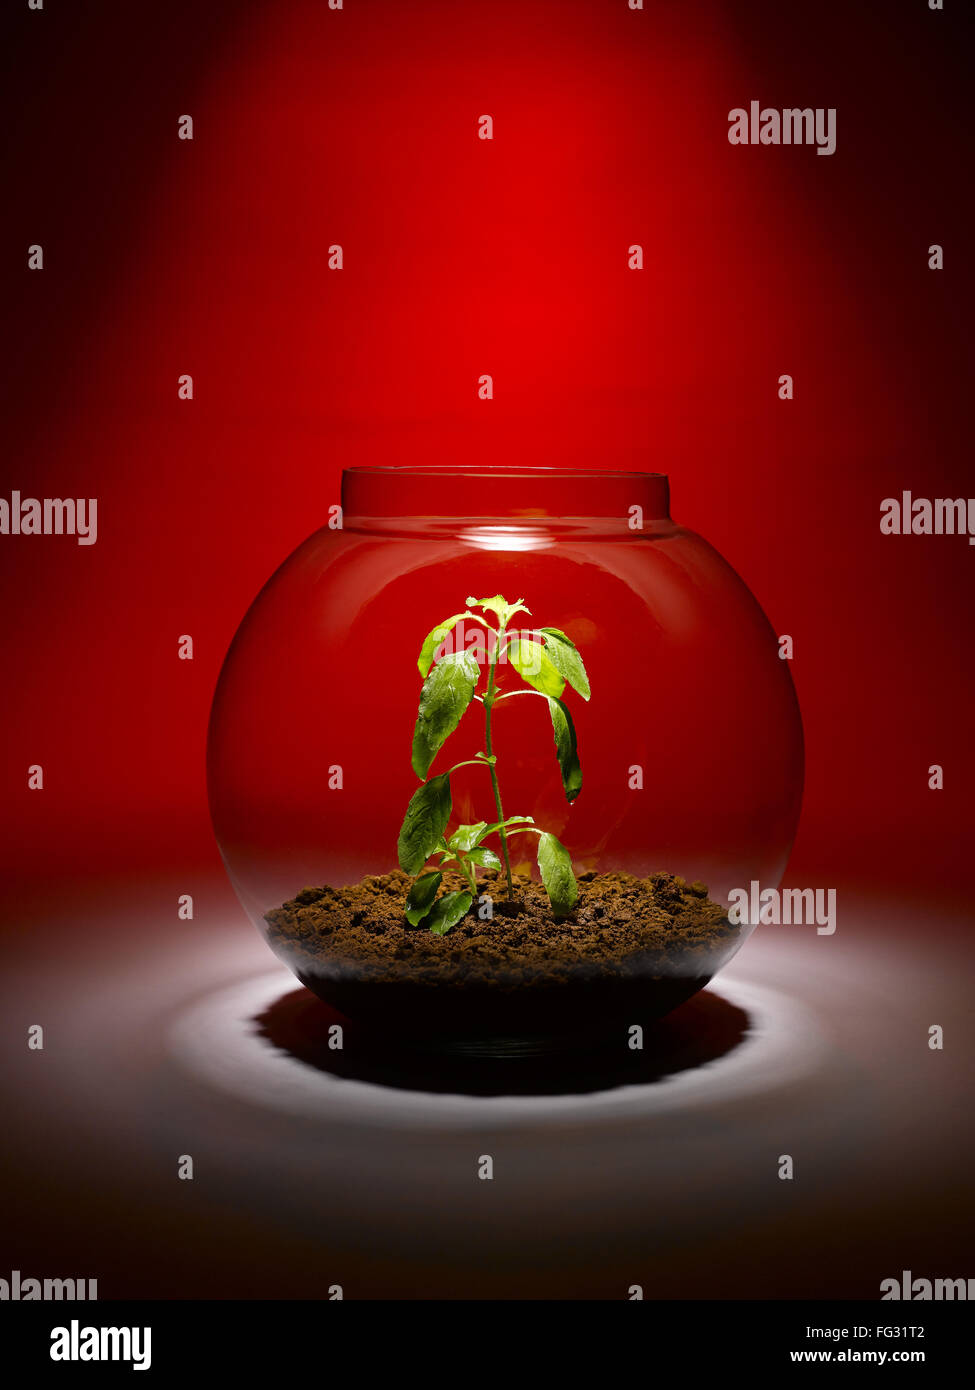 tulsi plant growing inside a glass bowl India Stock Photo